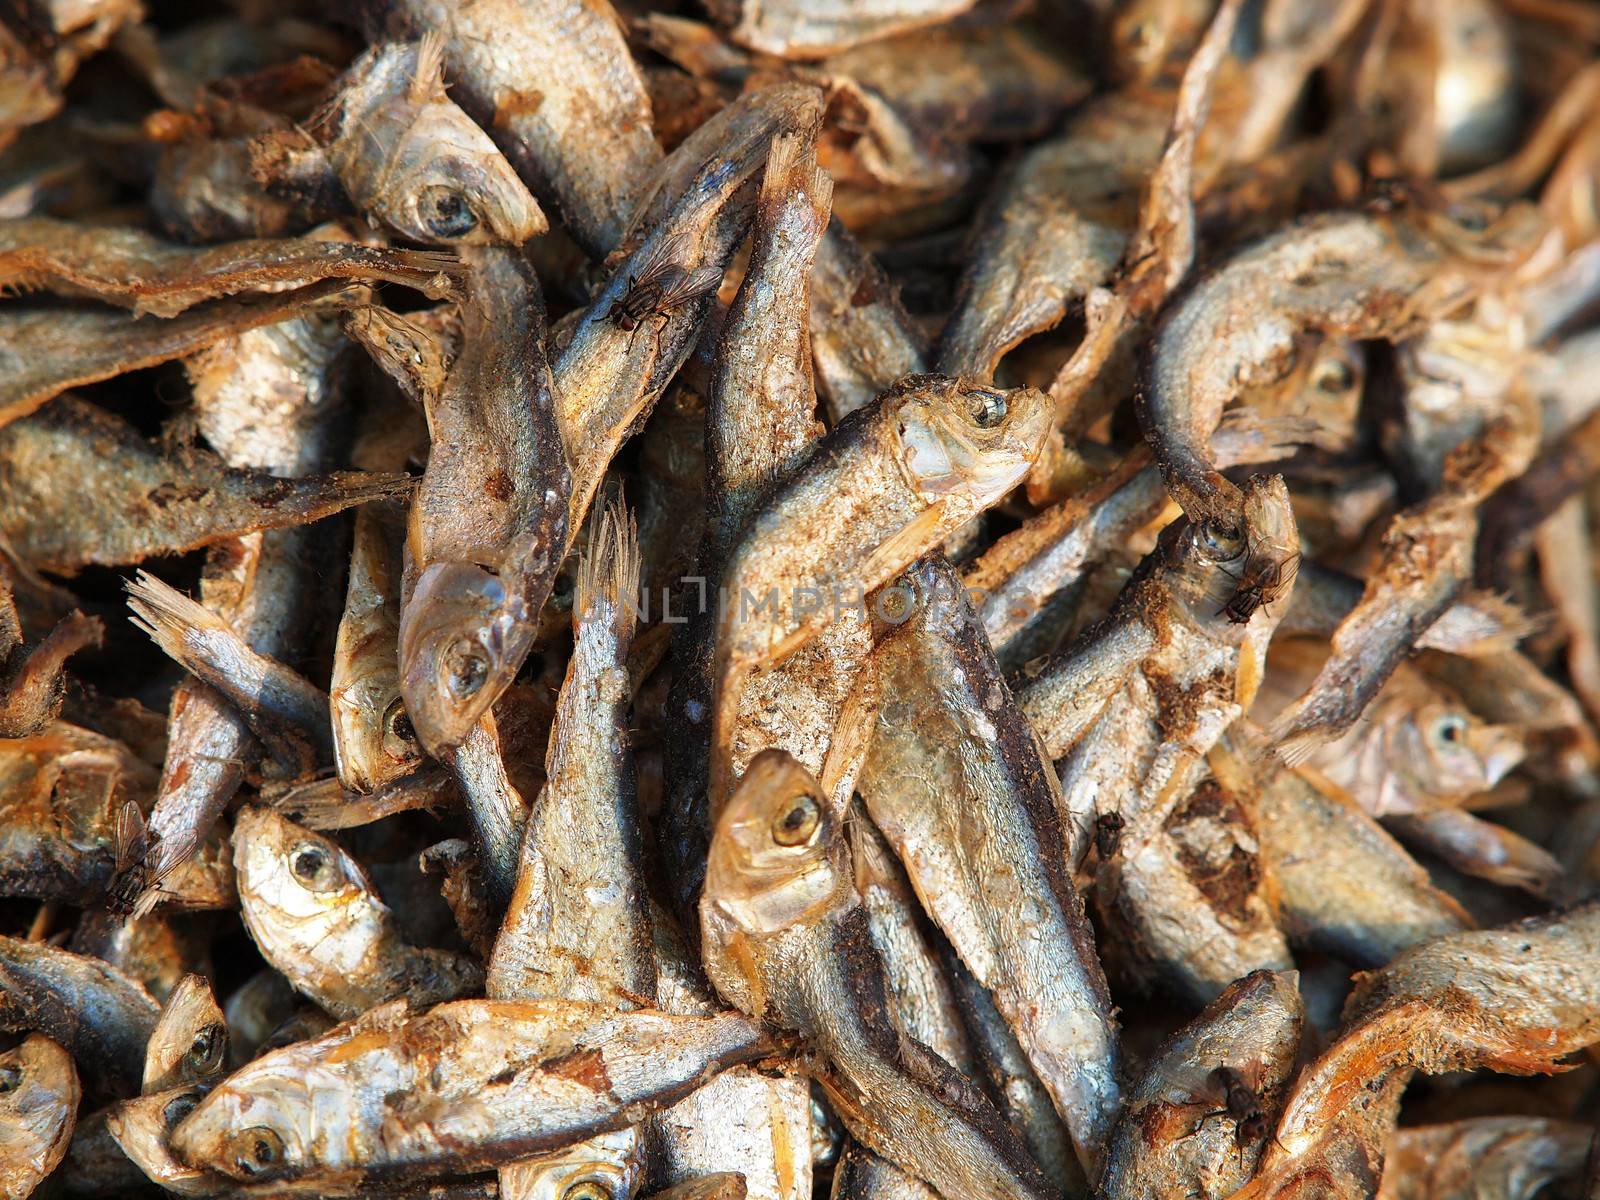 dry fish on the open market in Asia     